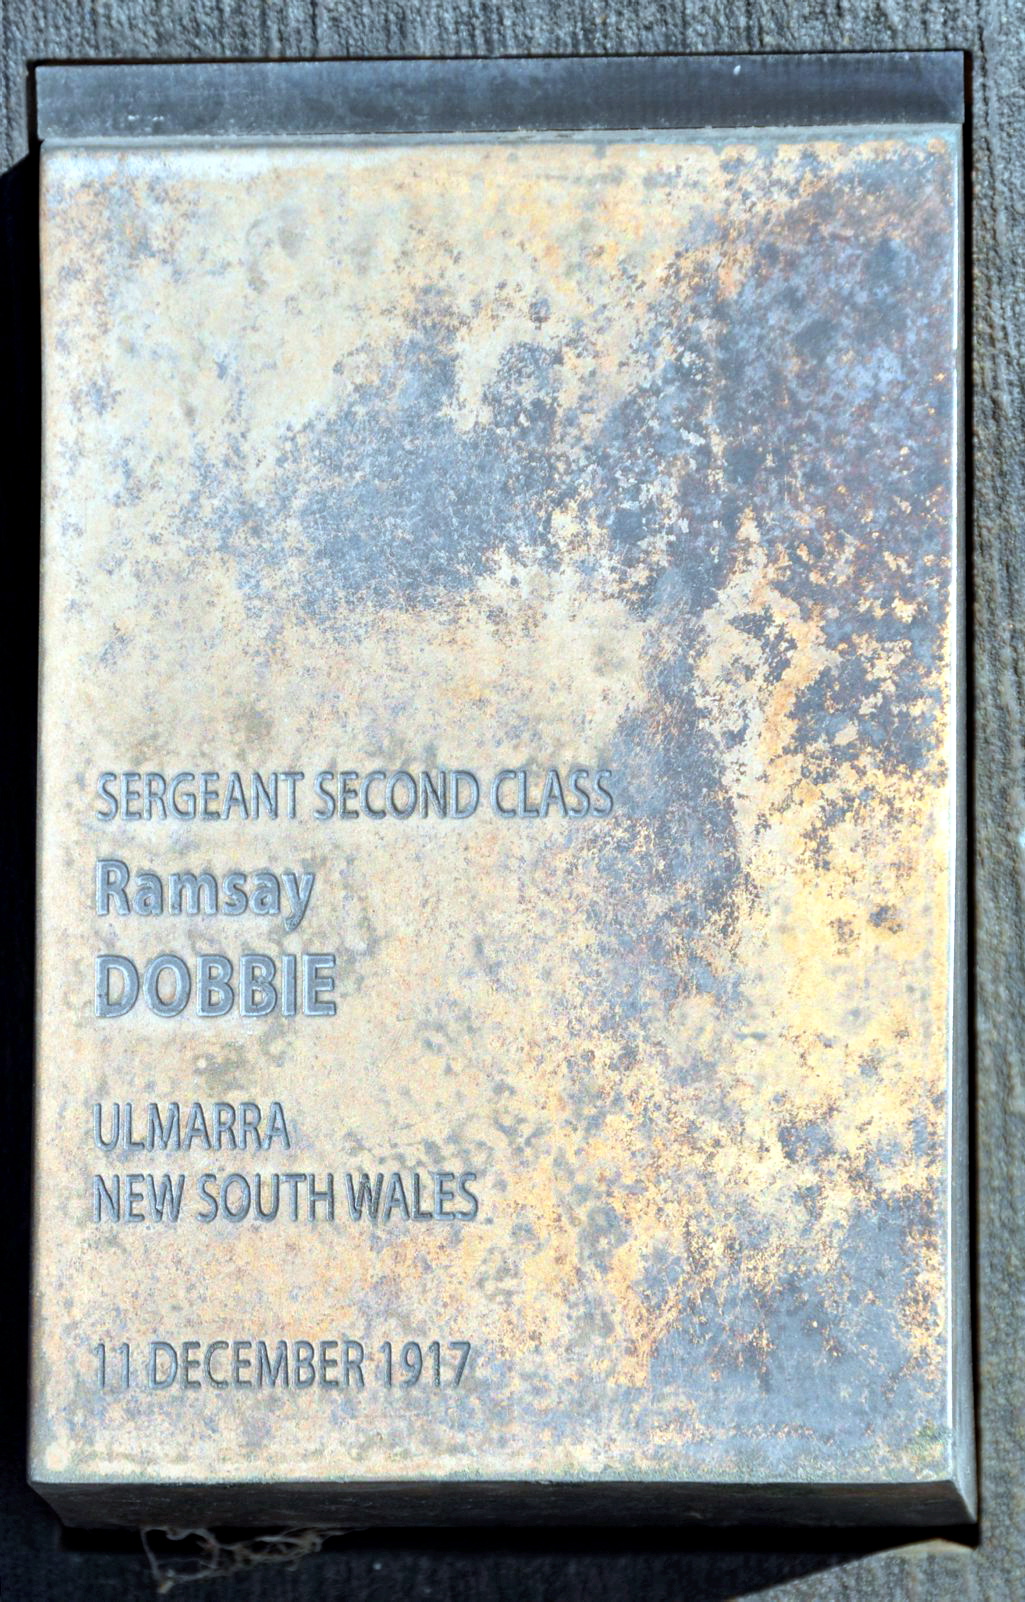 Touch Plate at the National Police Wall of Remembrance, Canberra